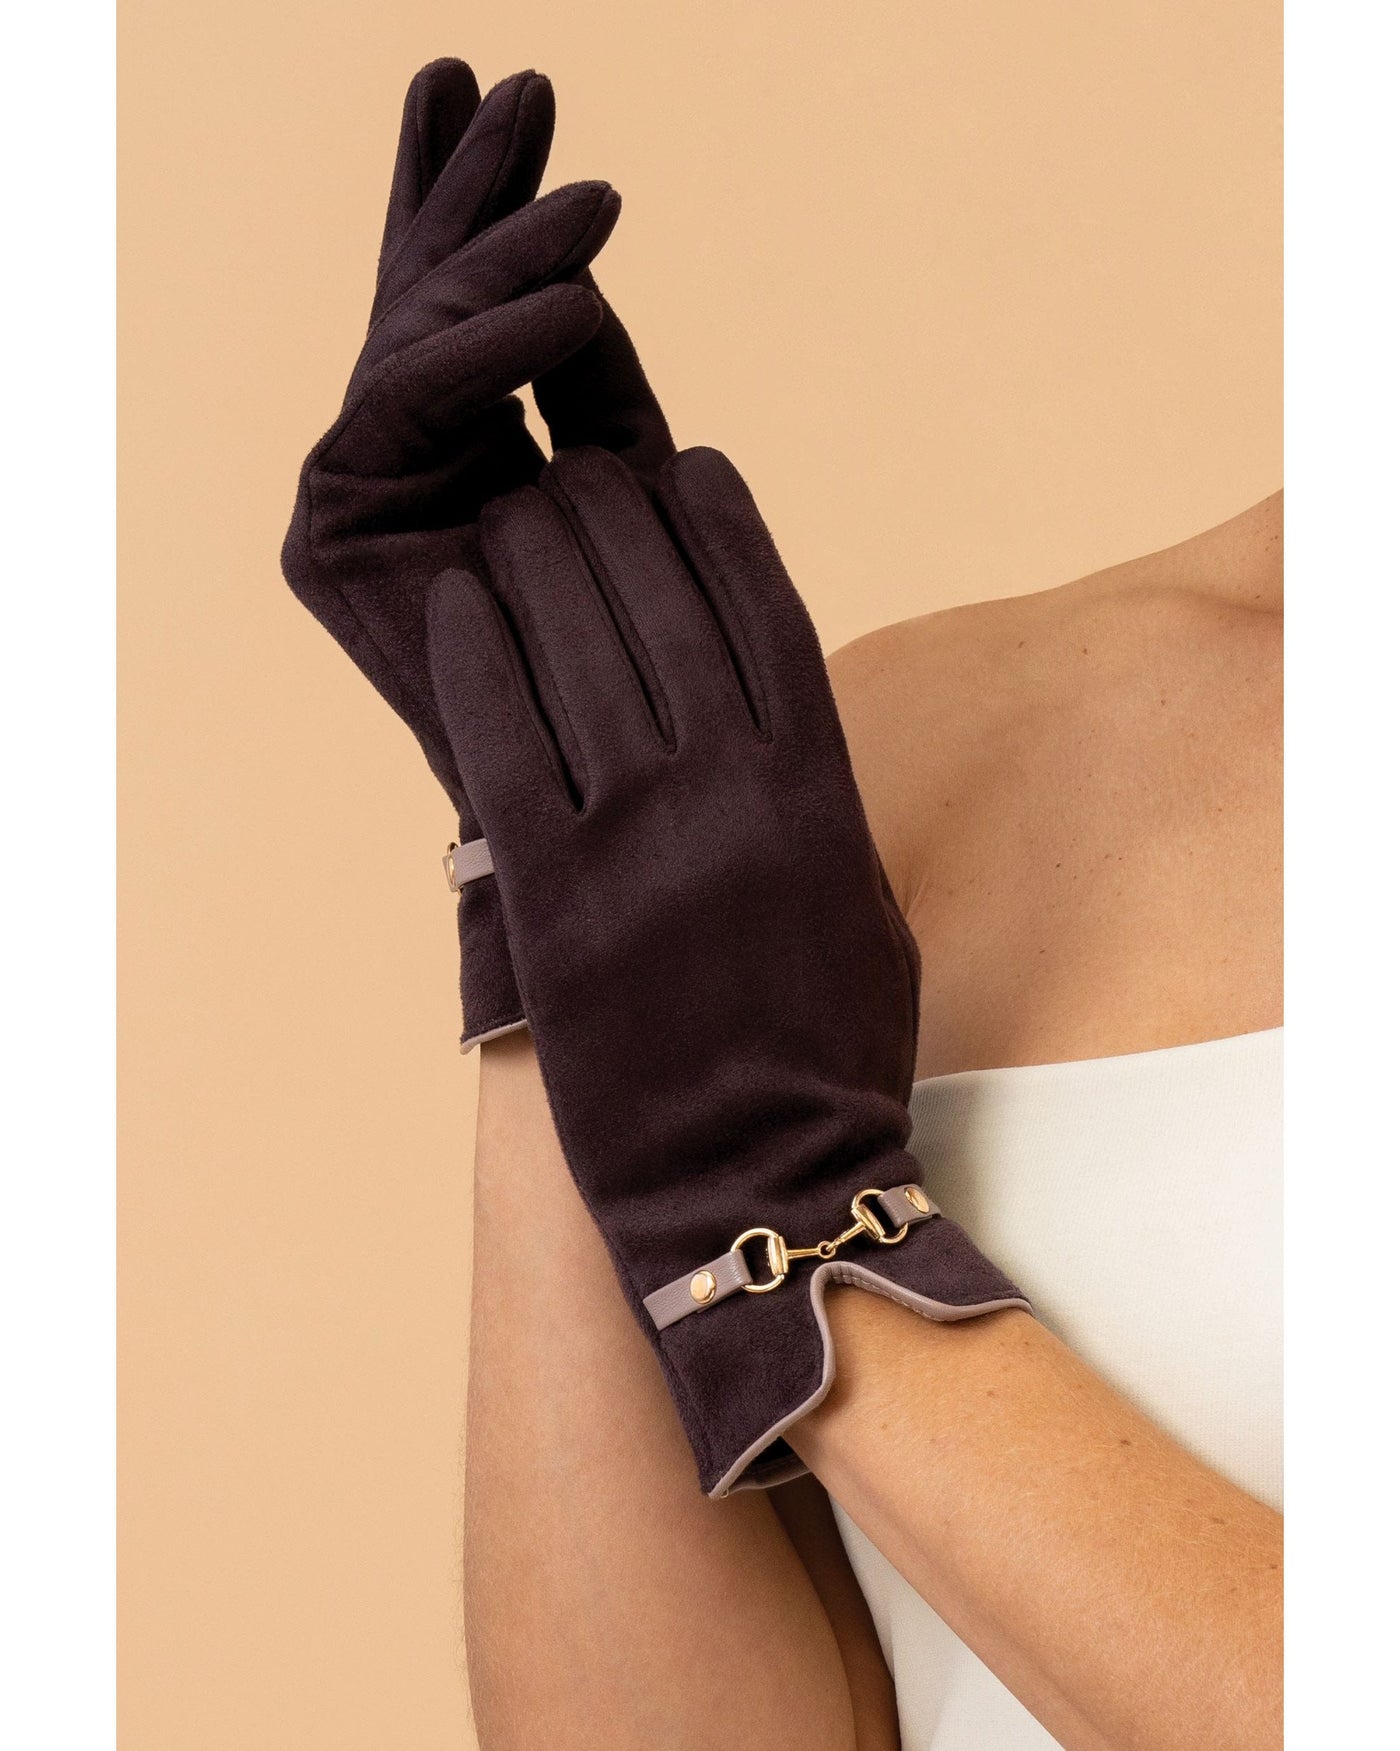 The Kylie Gloves